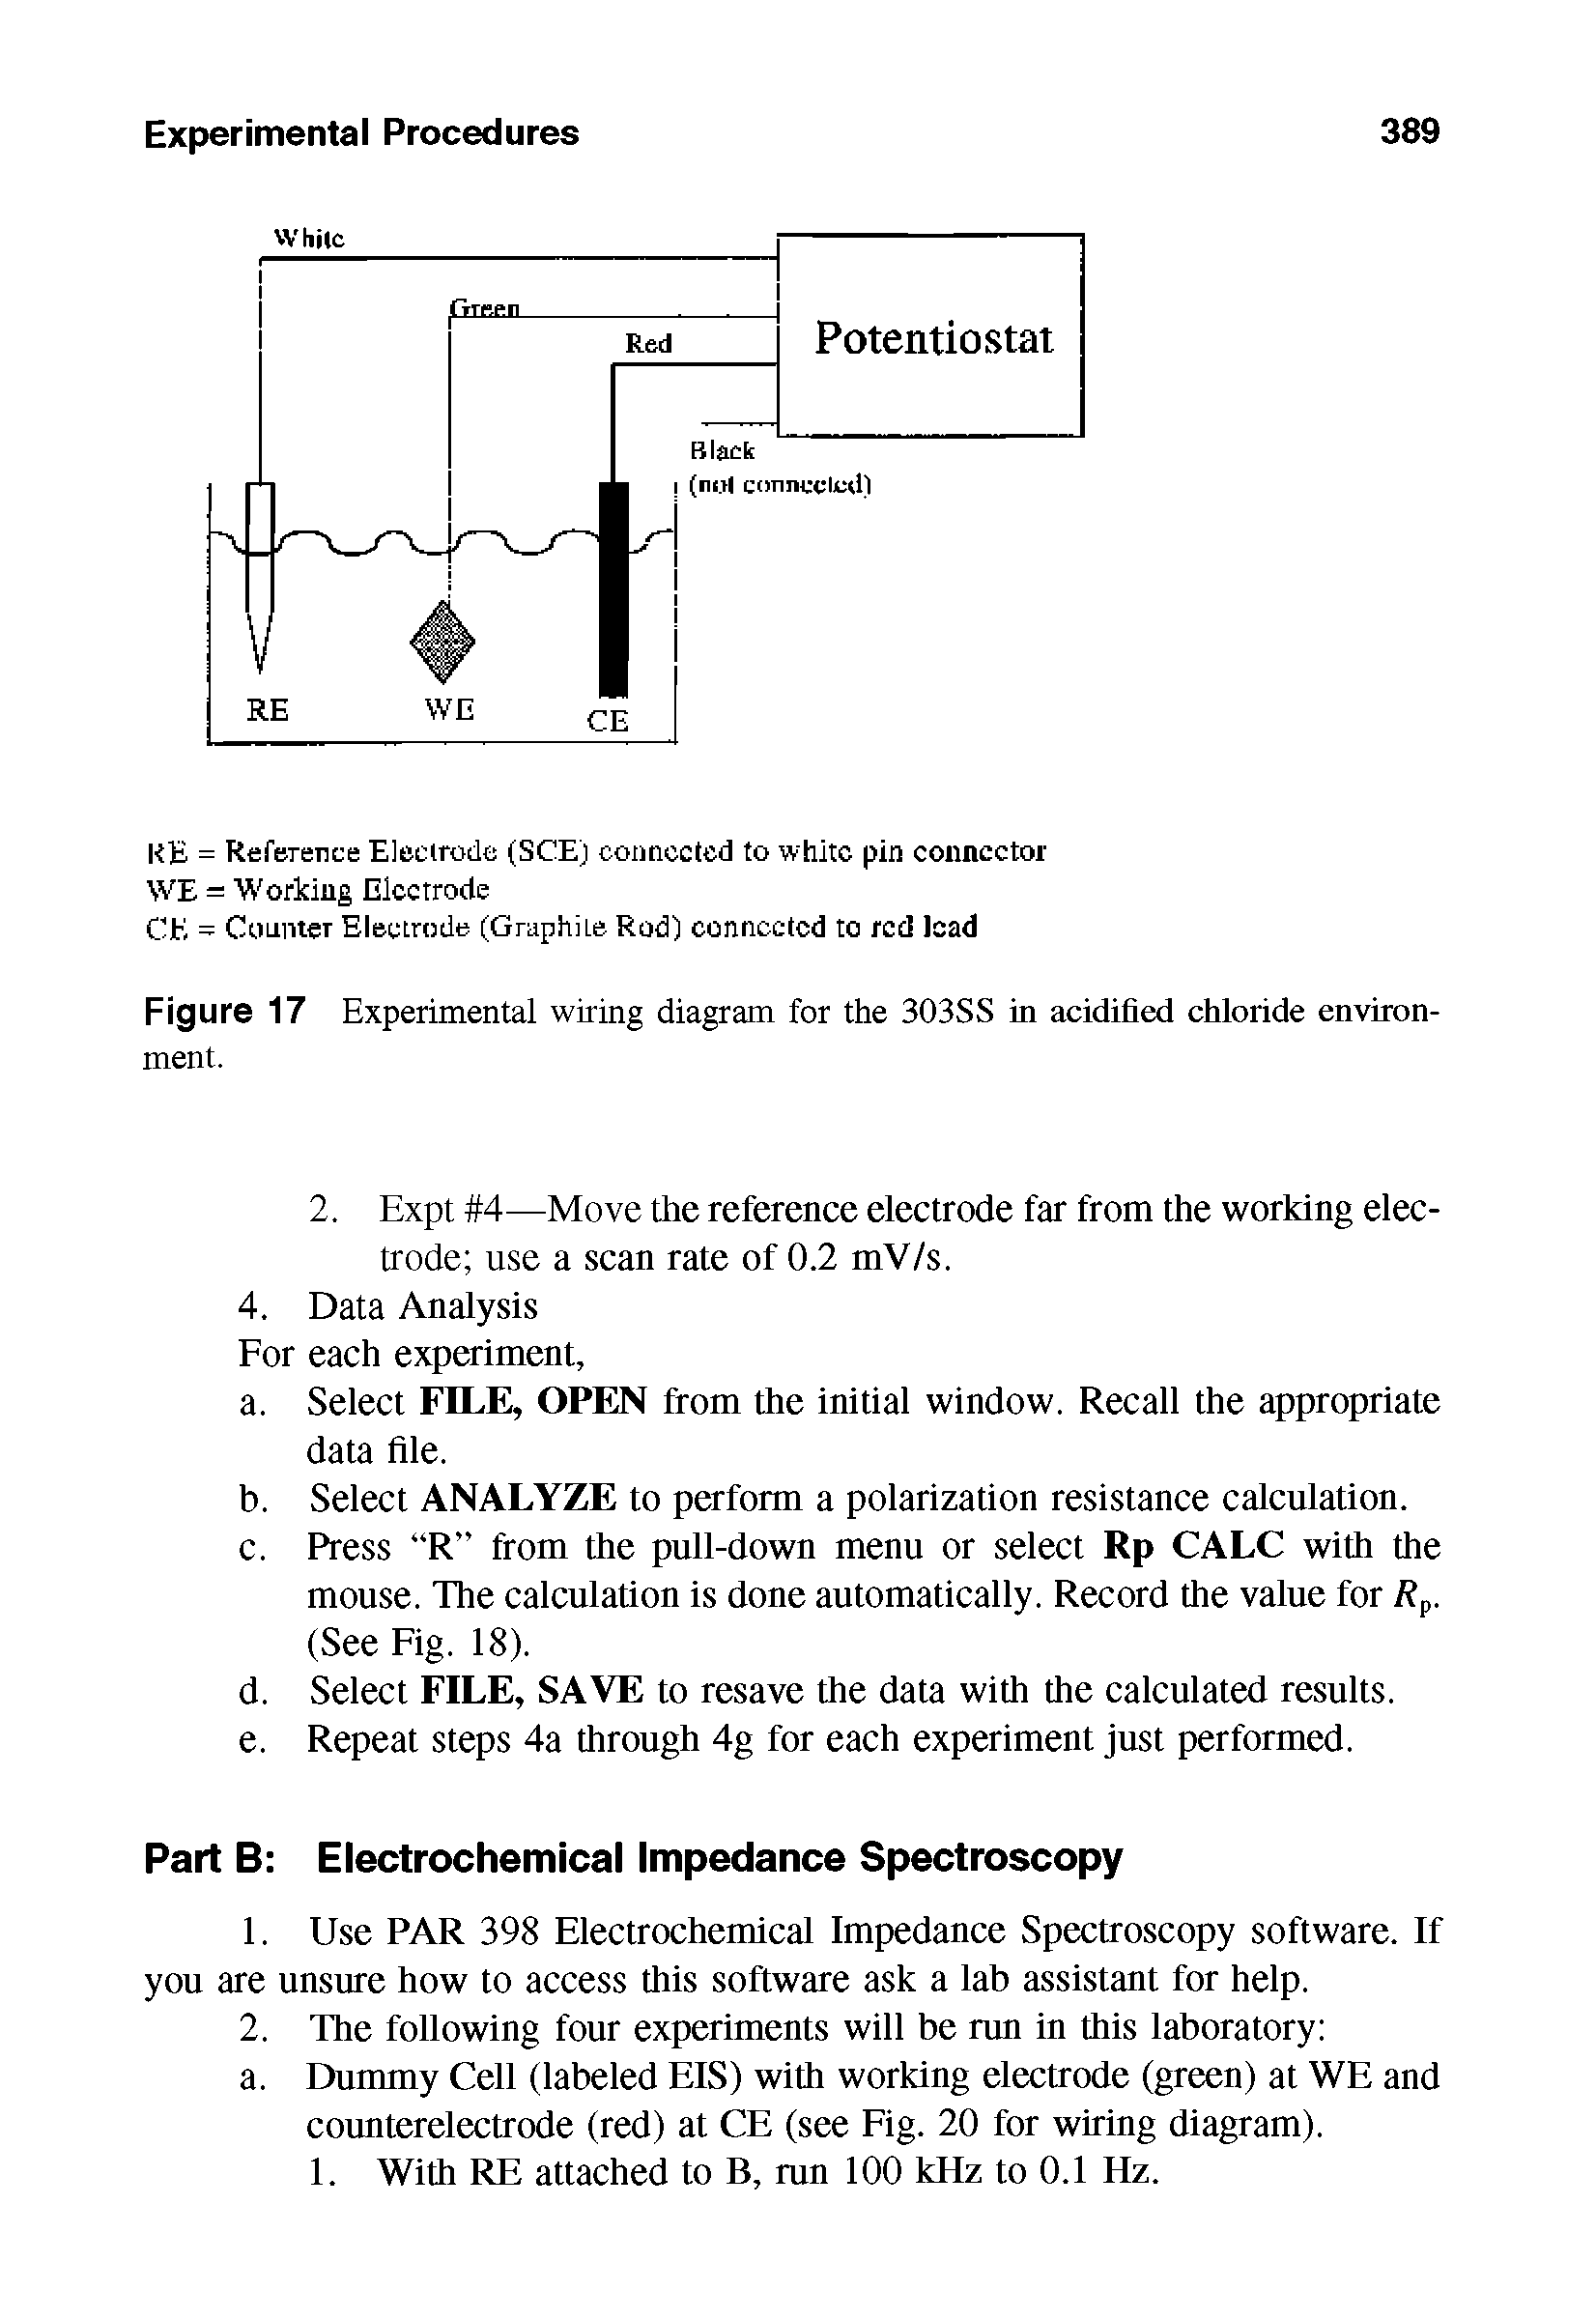 Figure 17 Experimental wiring diagram for the 303SS in acidified chloride environment.